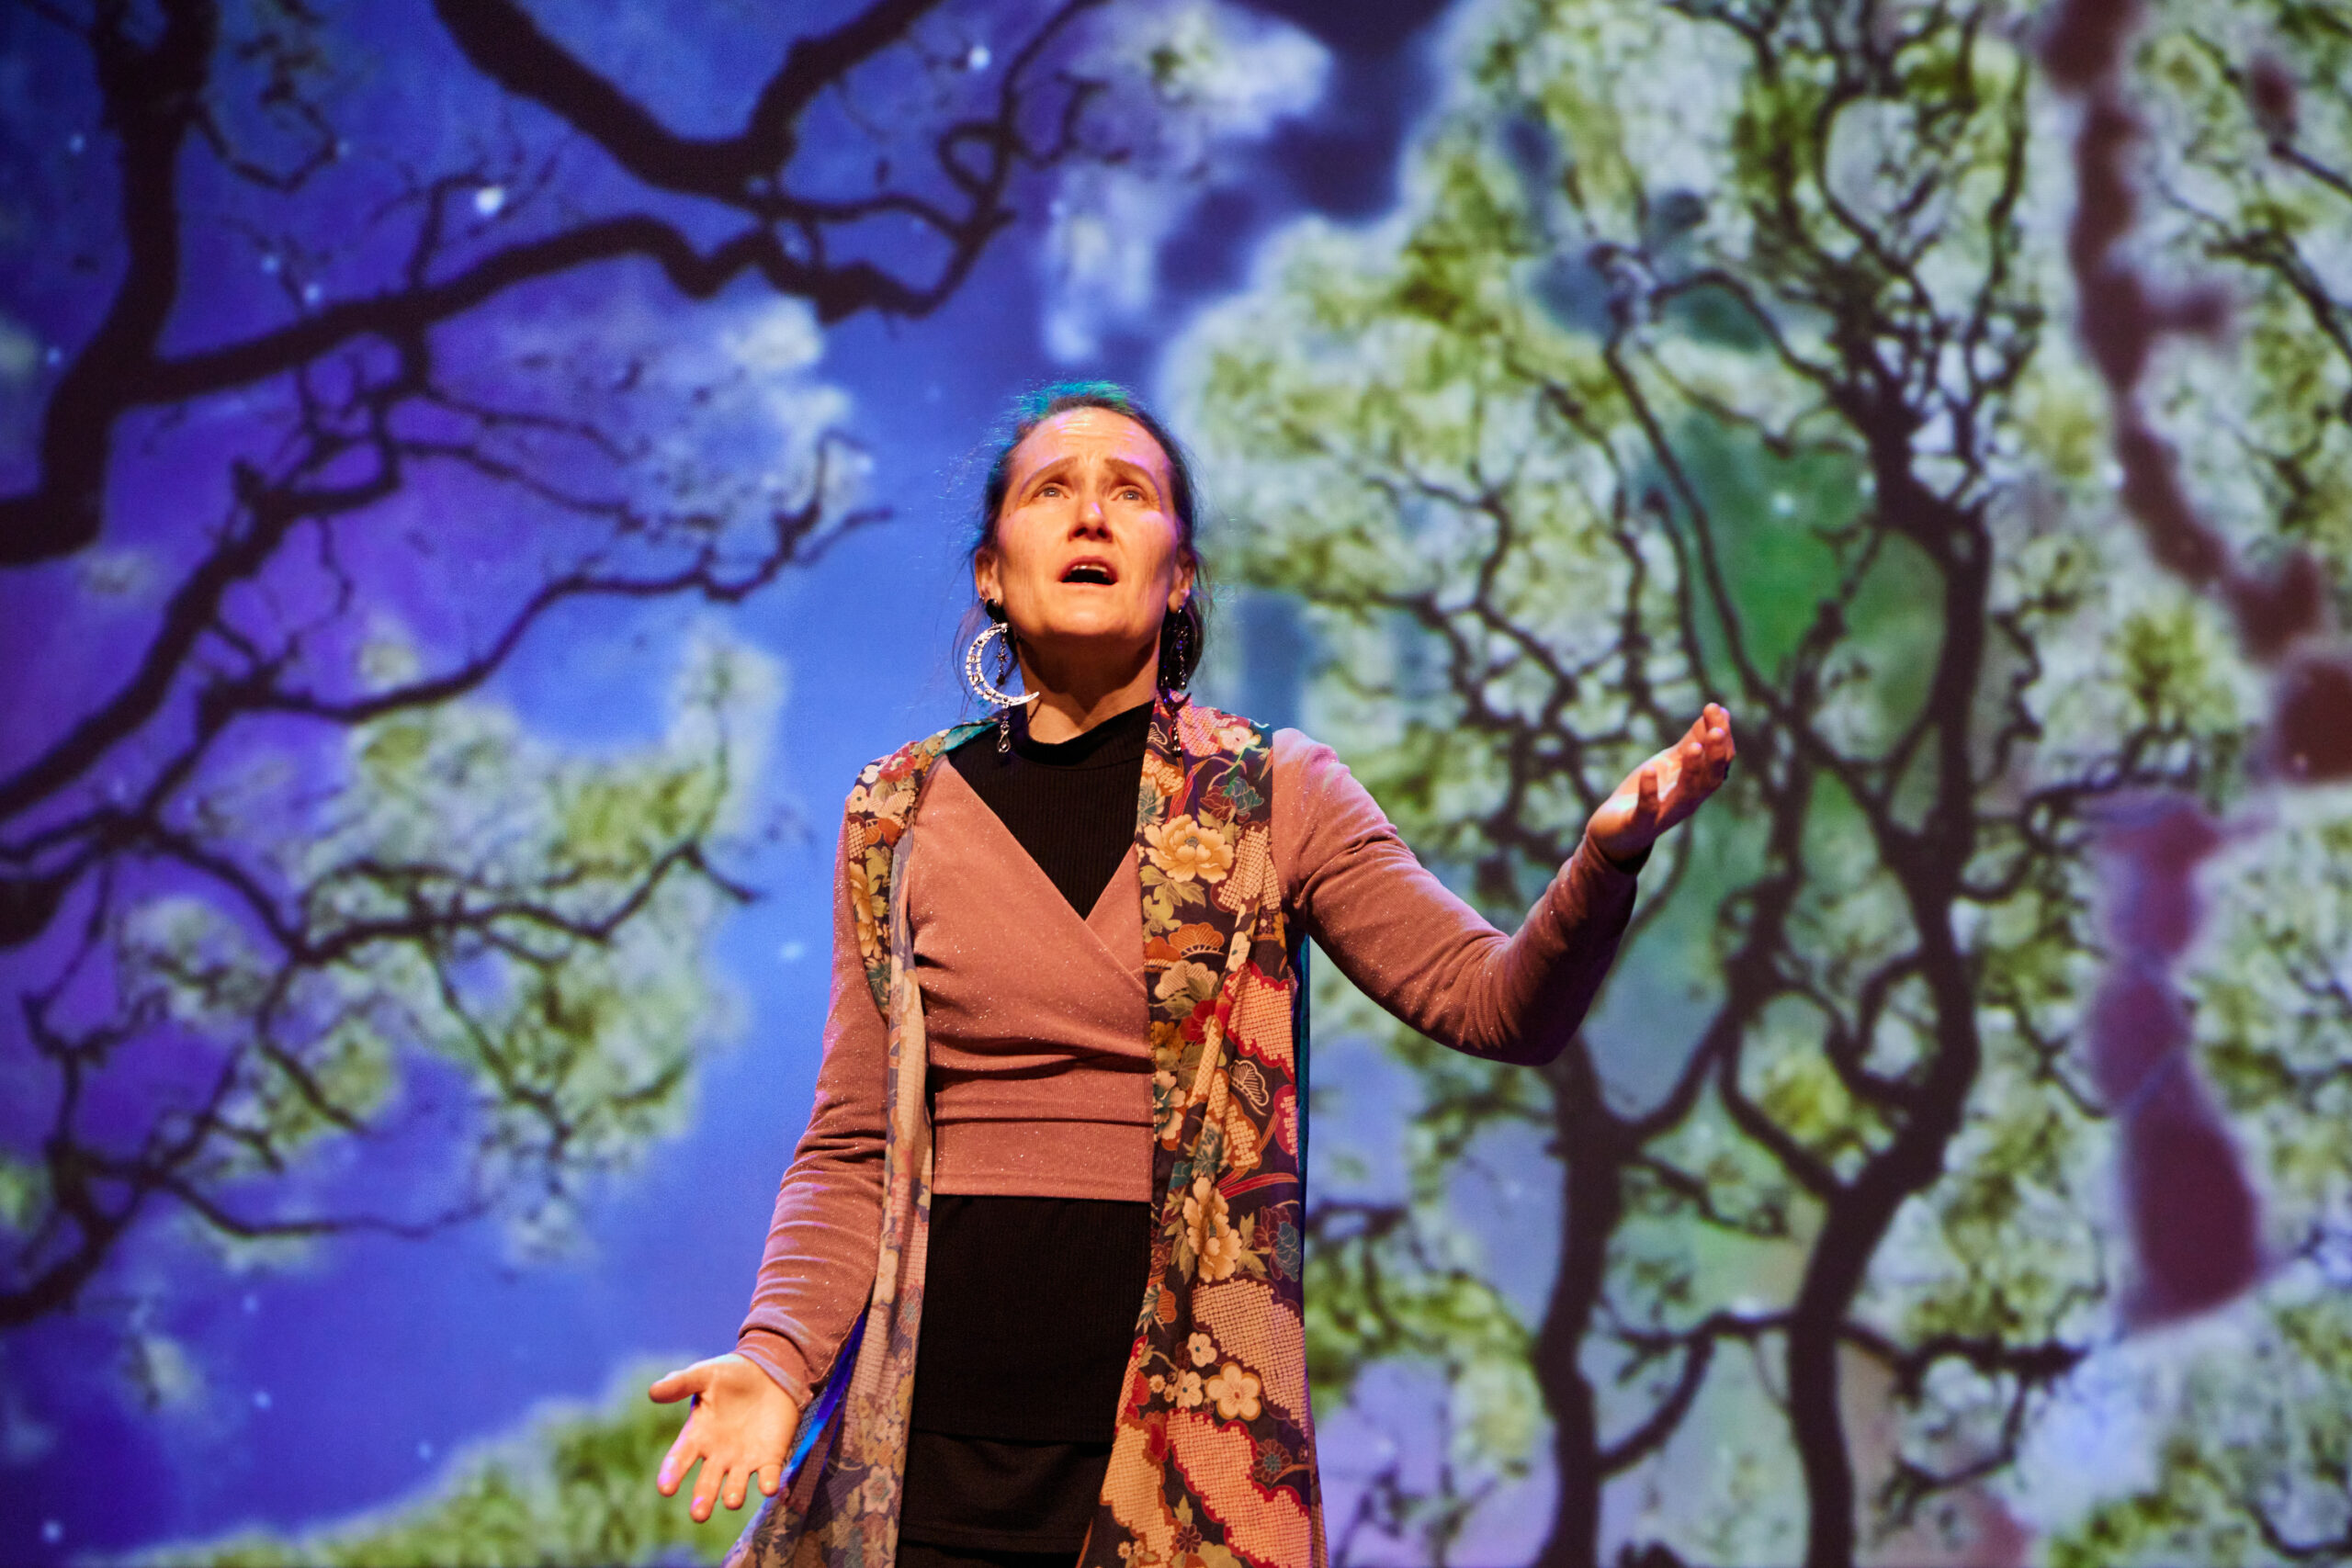 A woman dressed in earthy tones of brown and orange gestures on stage with a background projection of blue sky and green trees overhead.